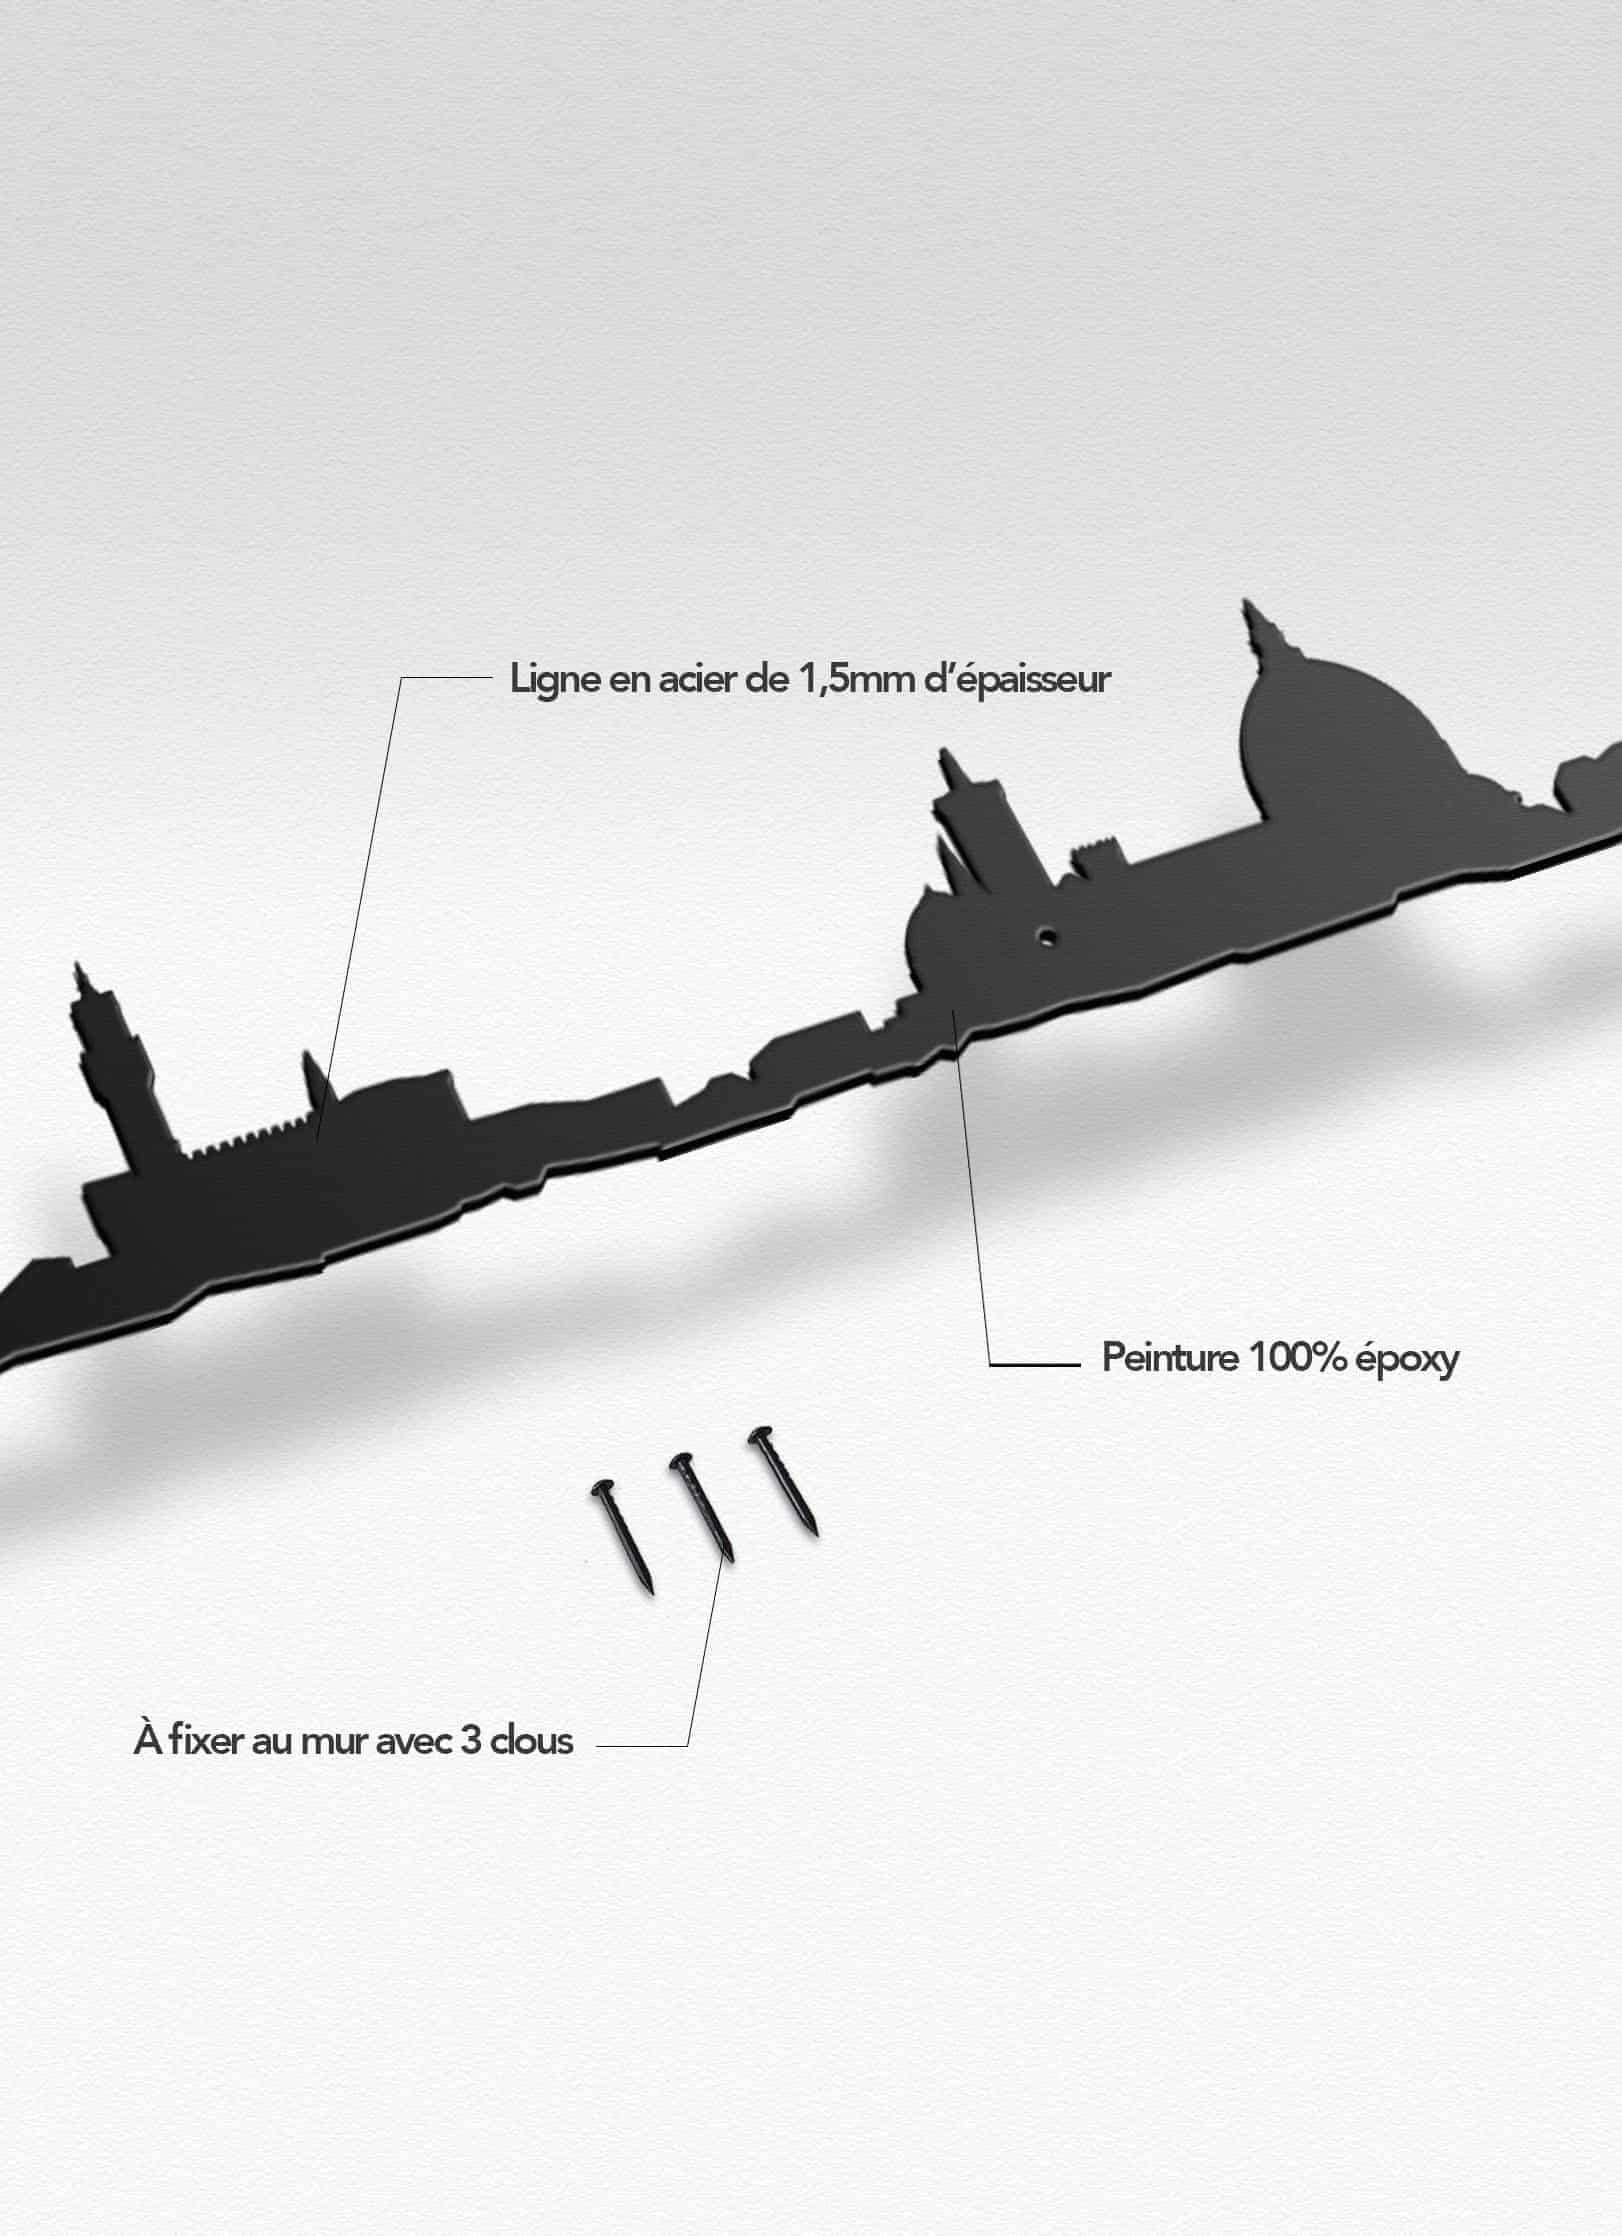 Presentation of the skyline of Florence